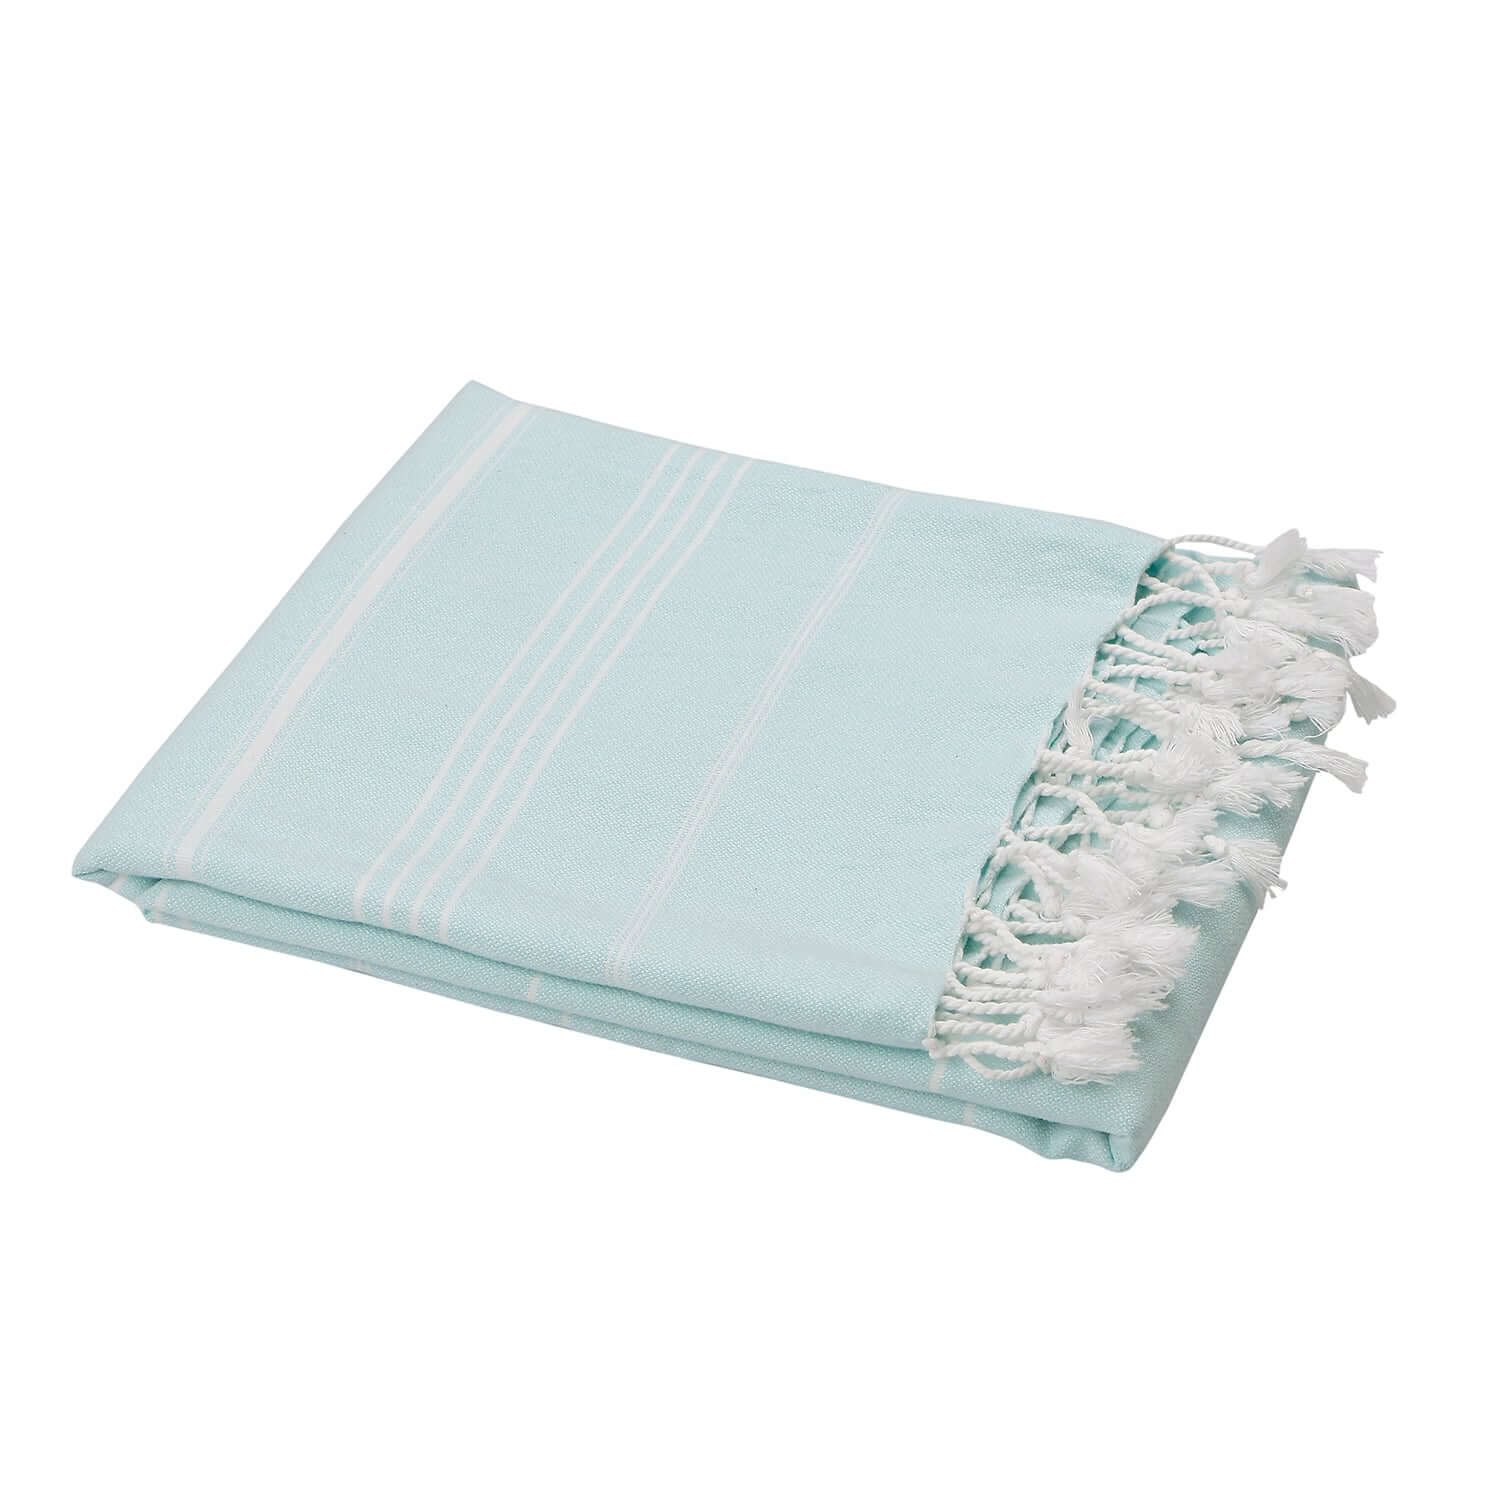 Folded Loom Legacy aqua beach towel with subtle white vertical stripes. The towel features fringed white tassels on its edge, all displayed against a white background.